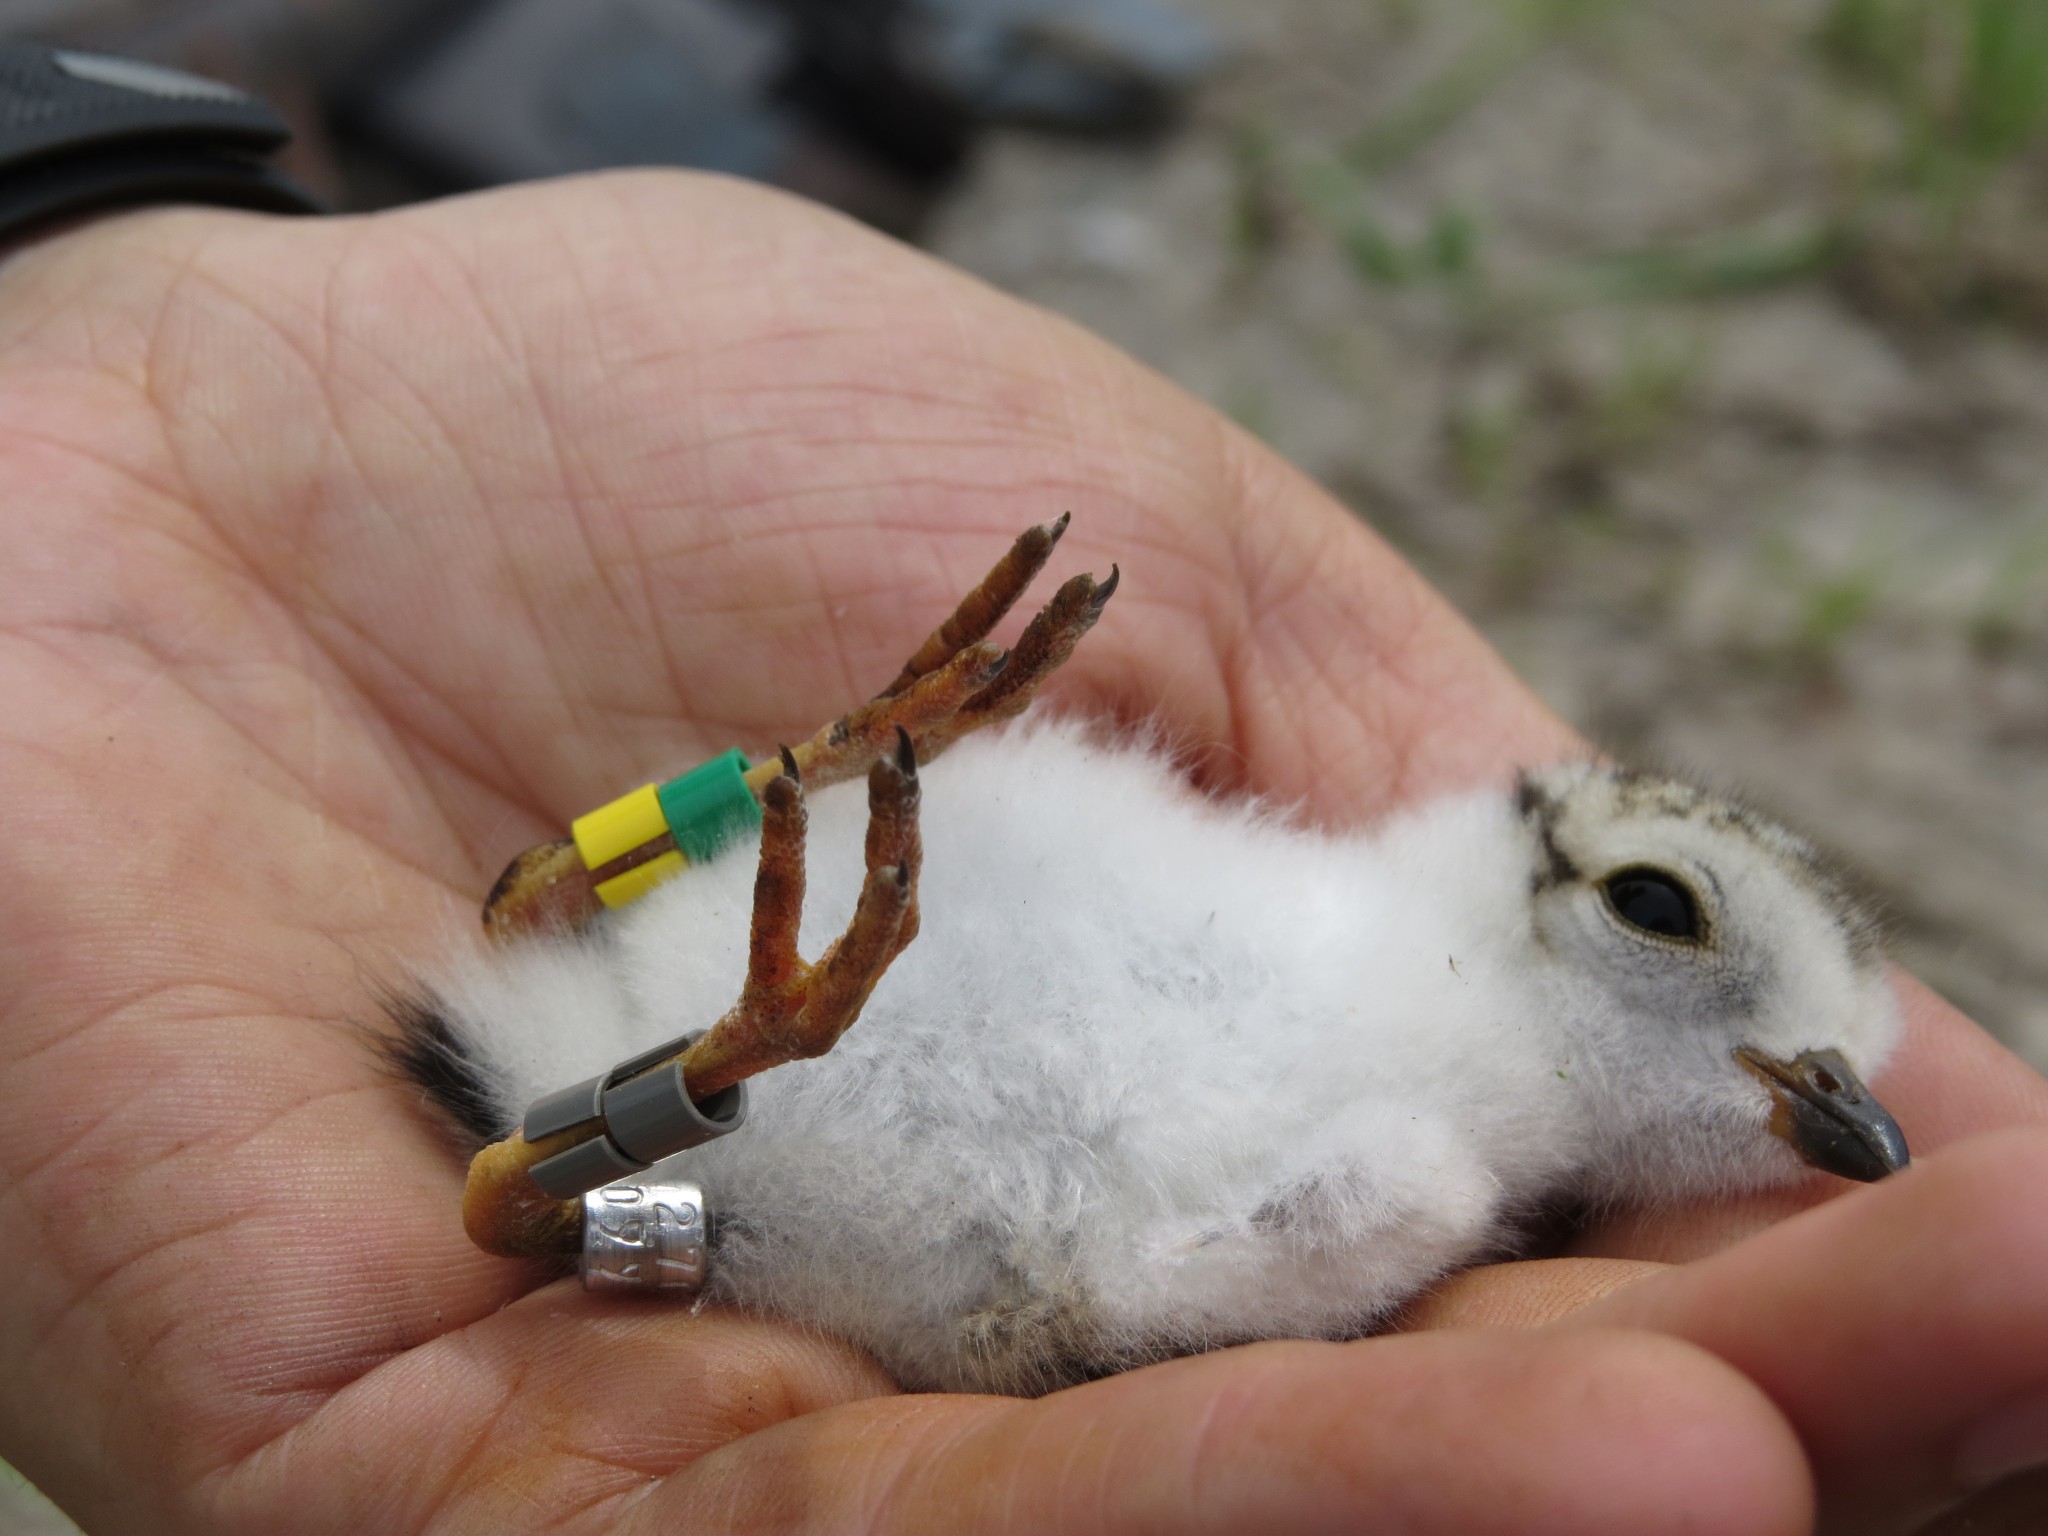 Seven-day old Piping Plover chicks banded along the lower Platte River in Dodge County, NE on June 13th, 2016.